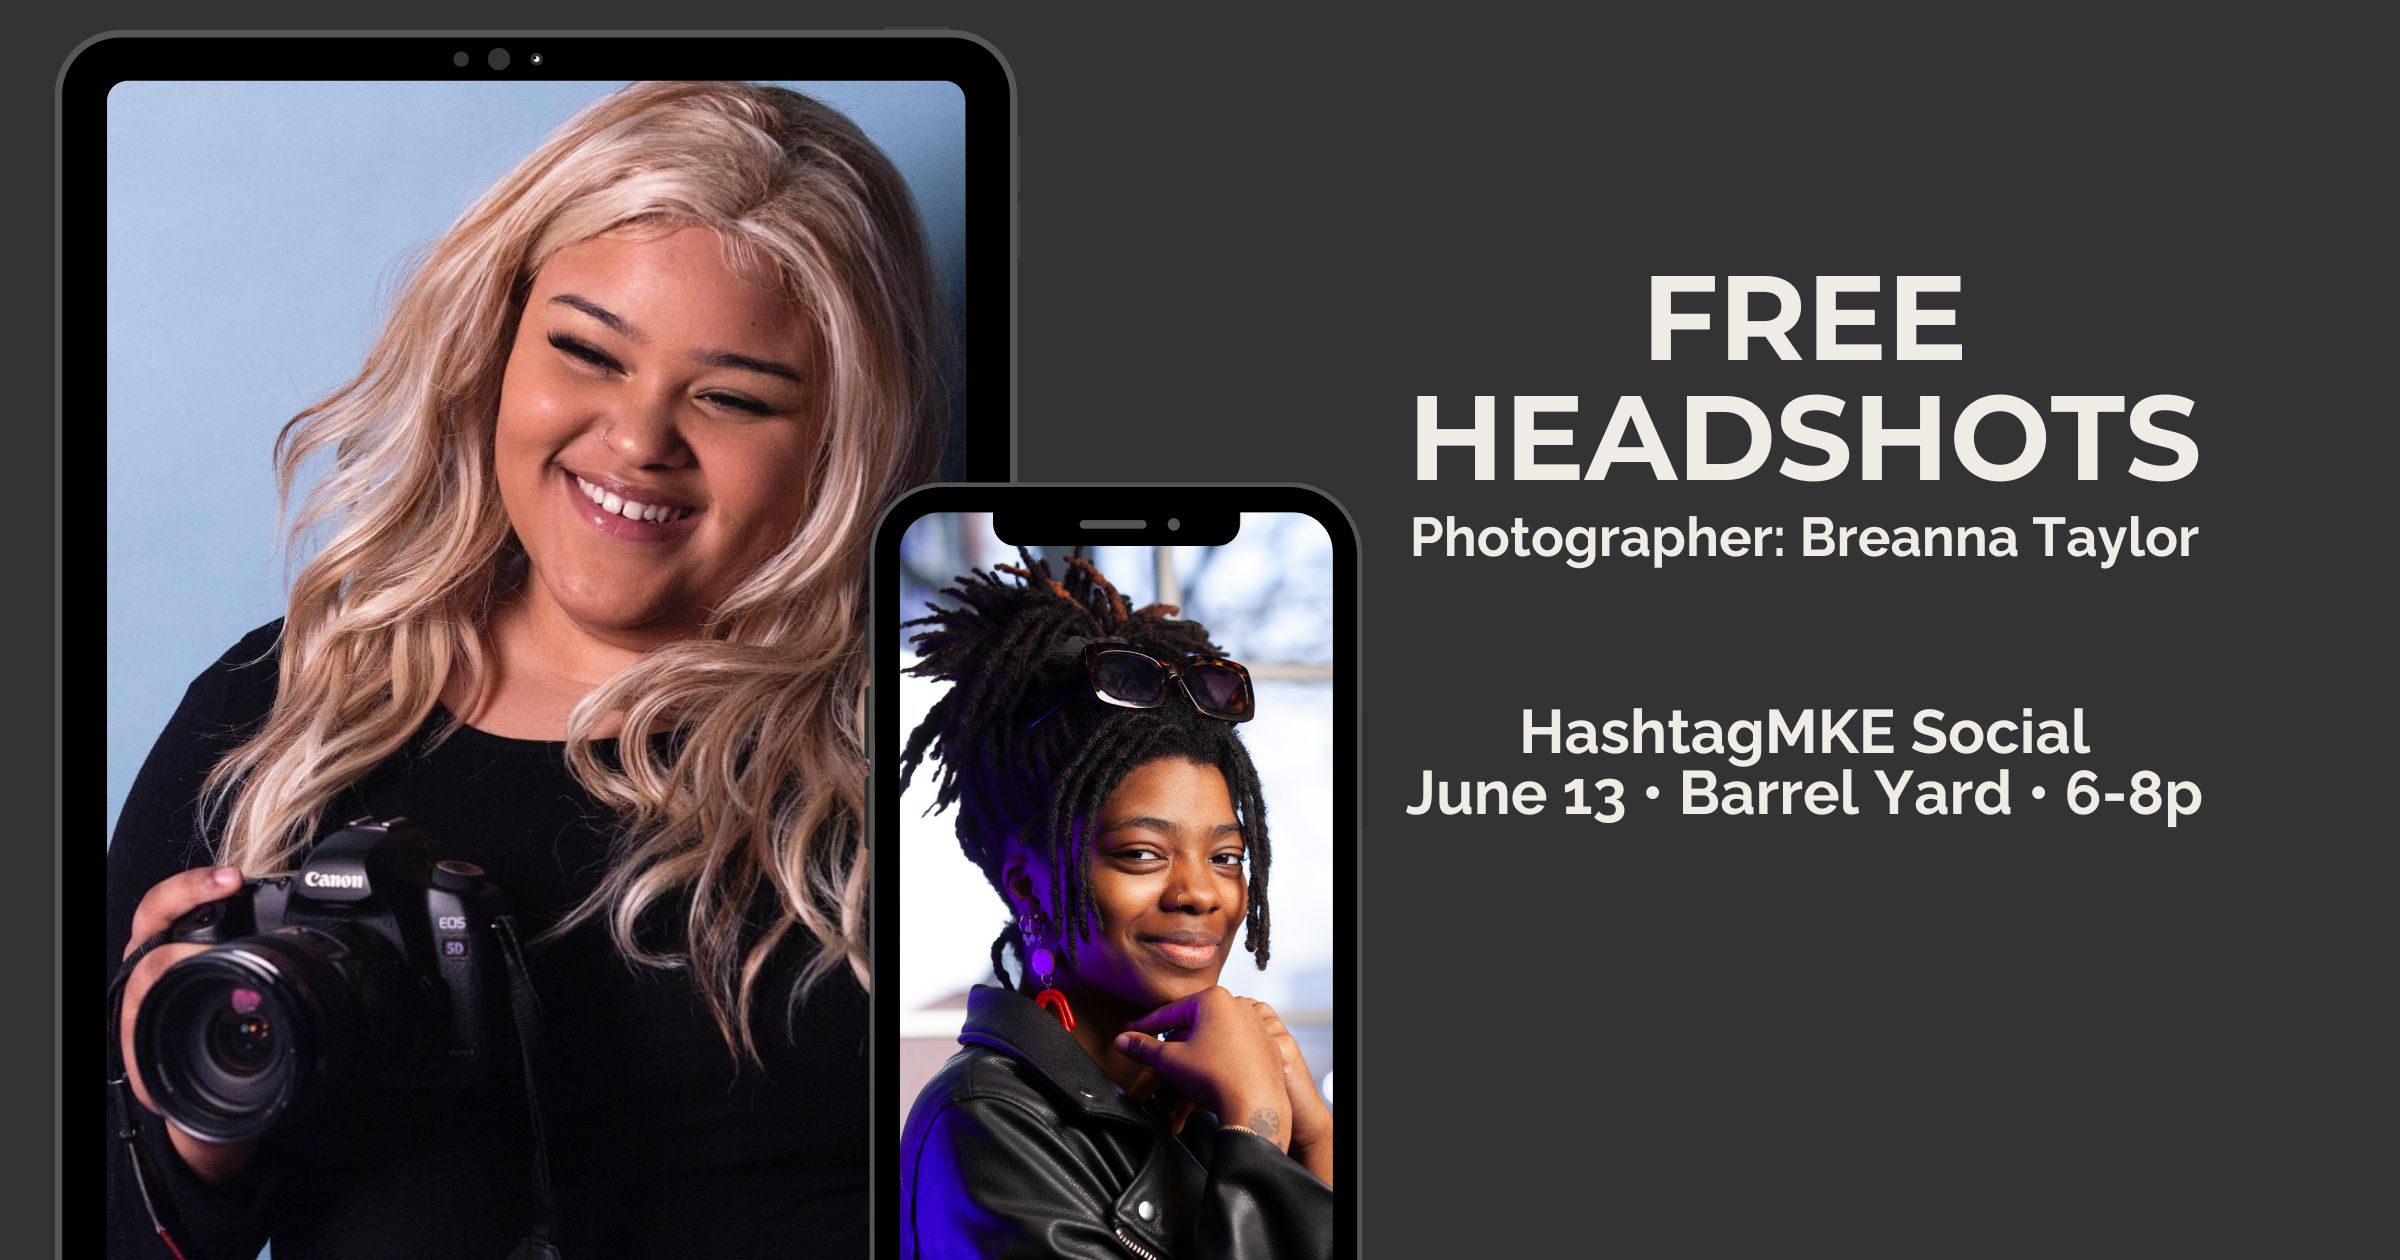 "Free Headshots by photographer, Breanna Taylor. This HashtagMKE Social will be on June 13 from 6 to 8 p.m. at the Barrel Yard."